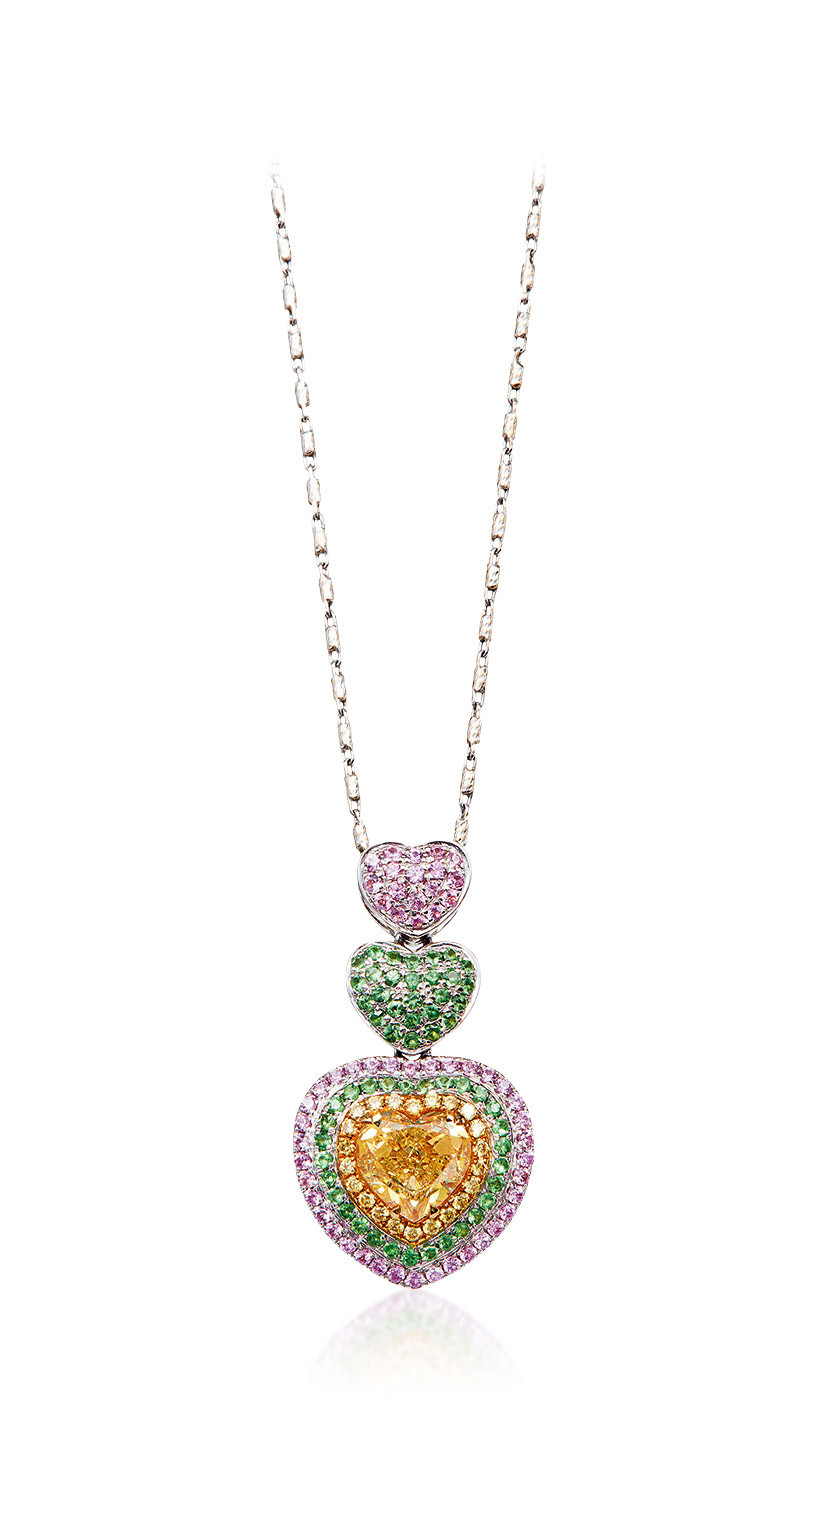 A 1.36 CARAT FANCY INTENSE YELLOW diamond AND COLORED STONE NECKLACE